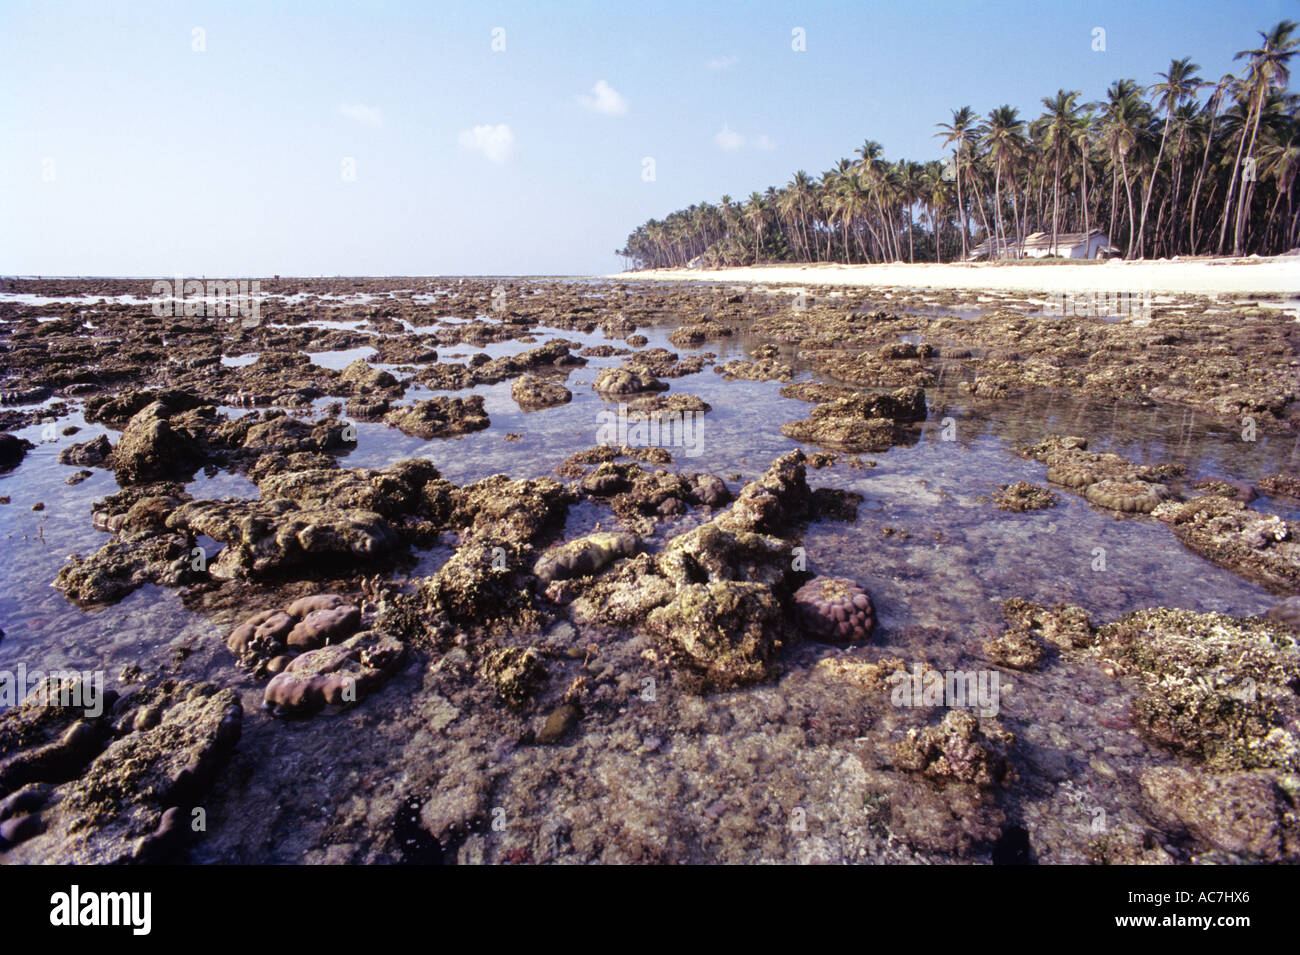 EXPOSE CORAL OF ANDROTT SHORE DURING LOW TIDE Stock Photo